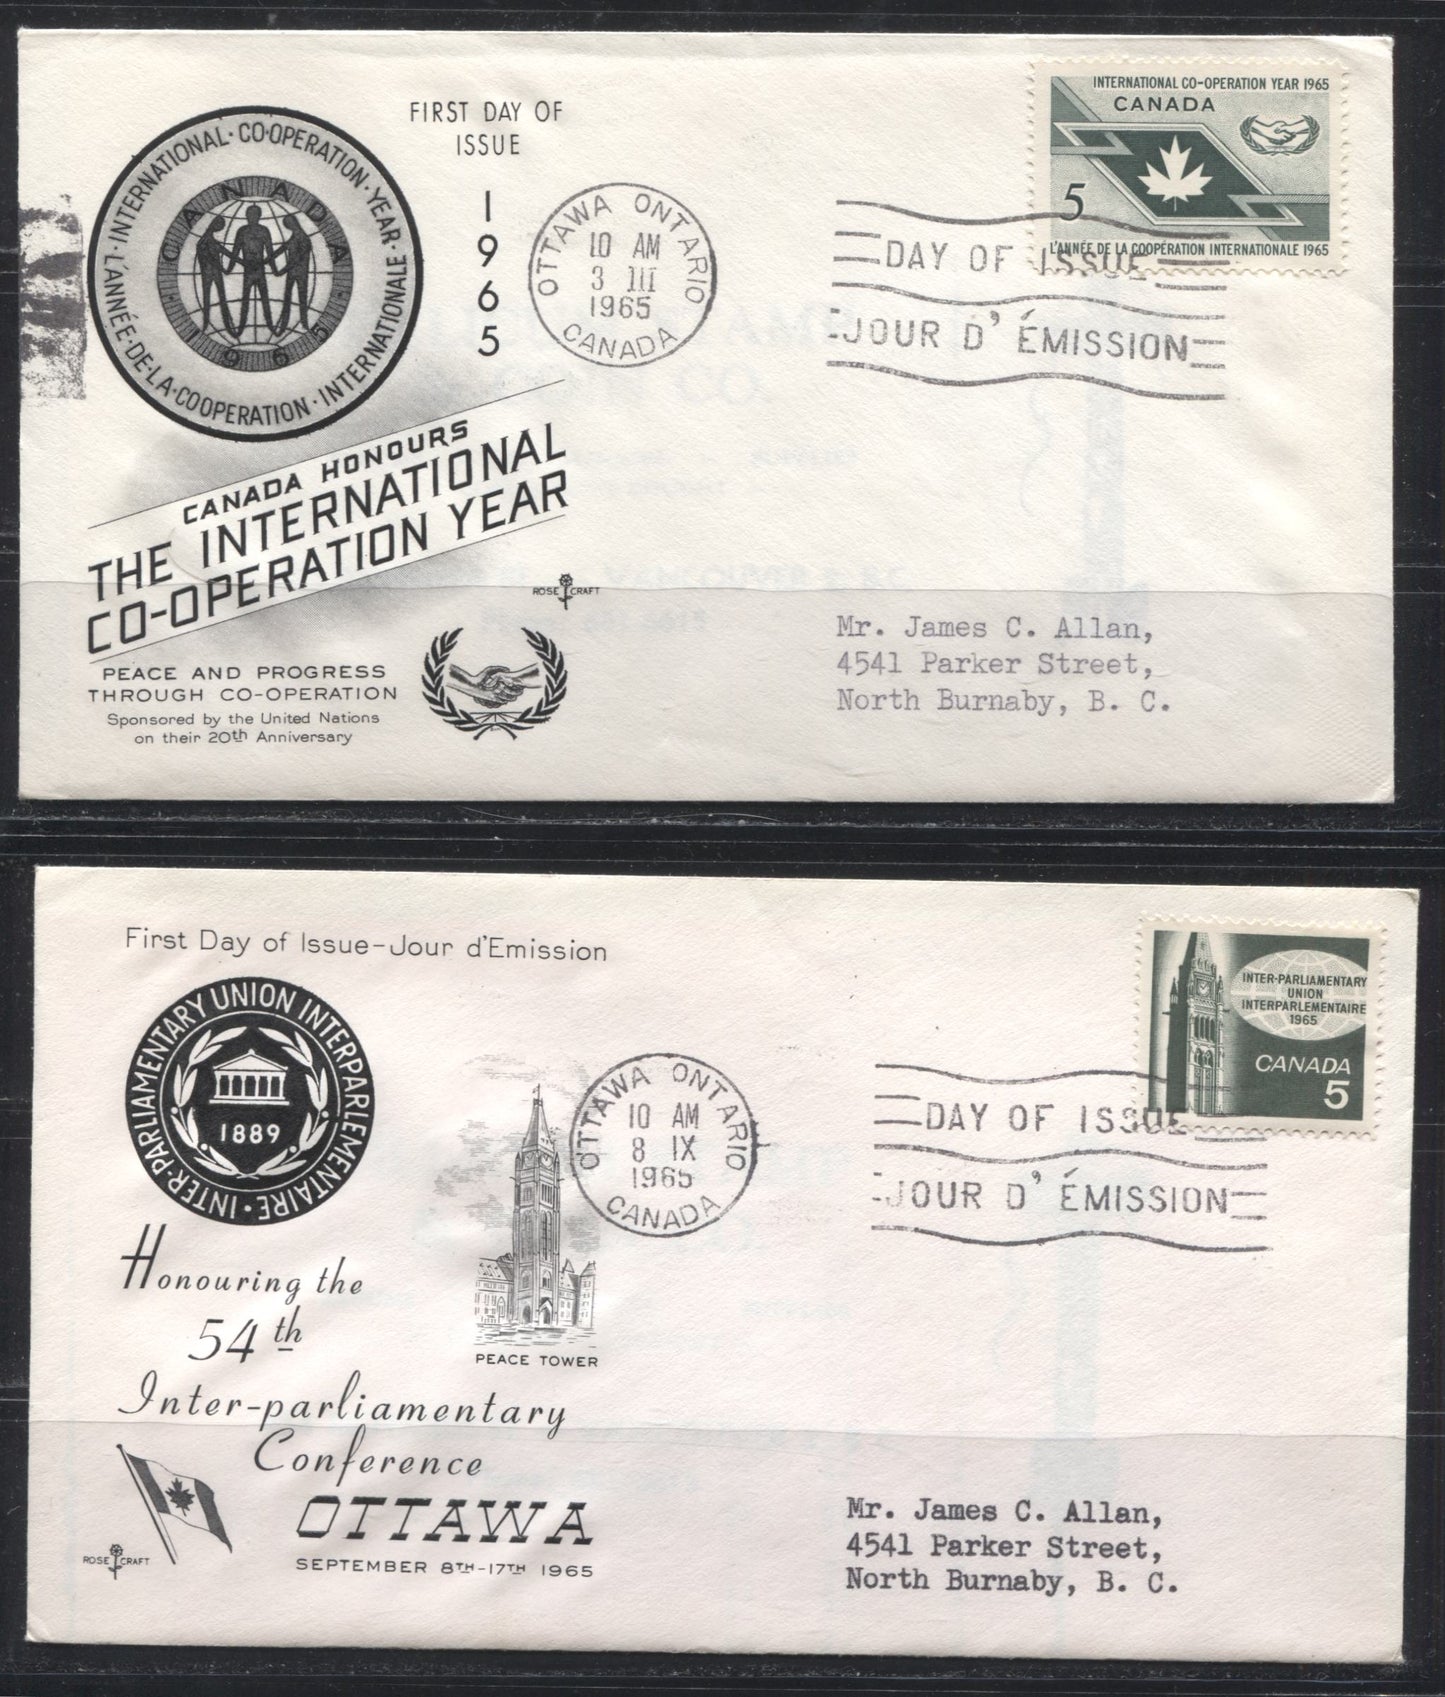 1965 Commemorative Issues - 8 Rosecraft and 1 Chickering First Day Covers Franked With Singles and Blocks of 4